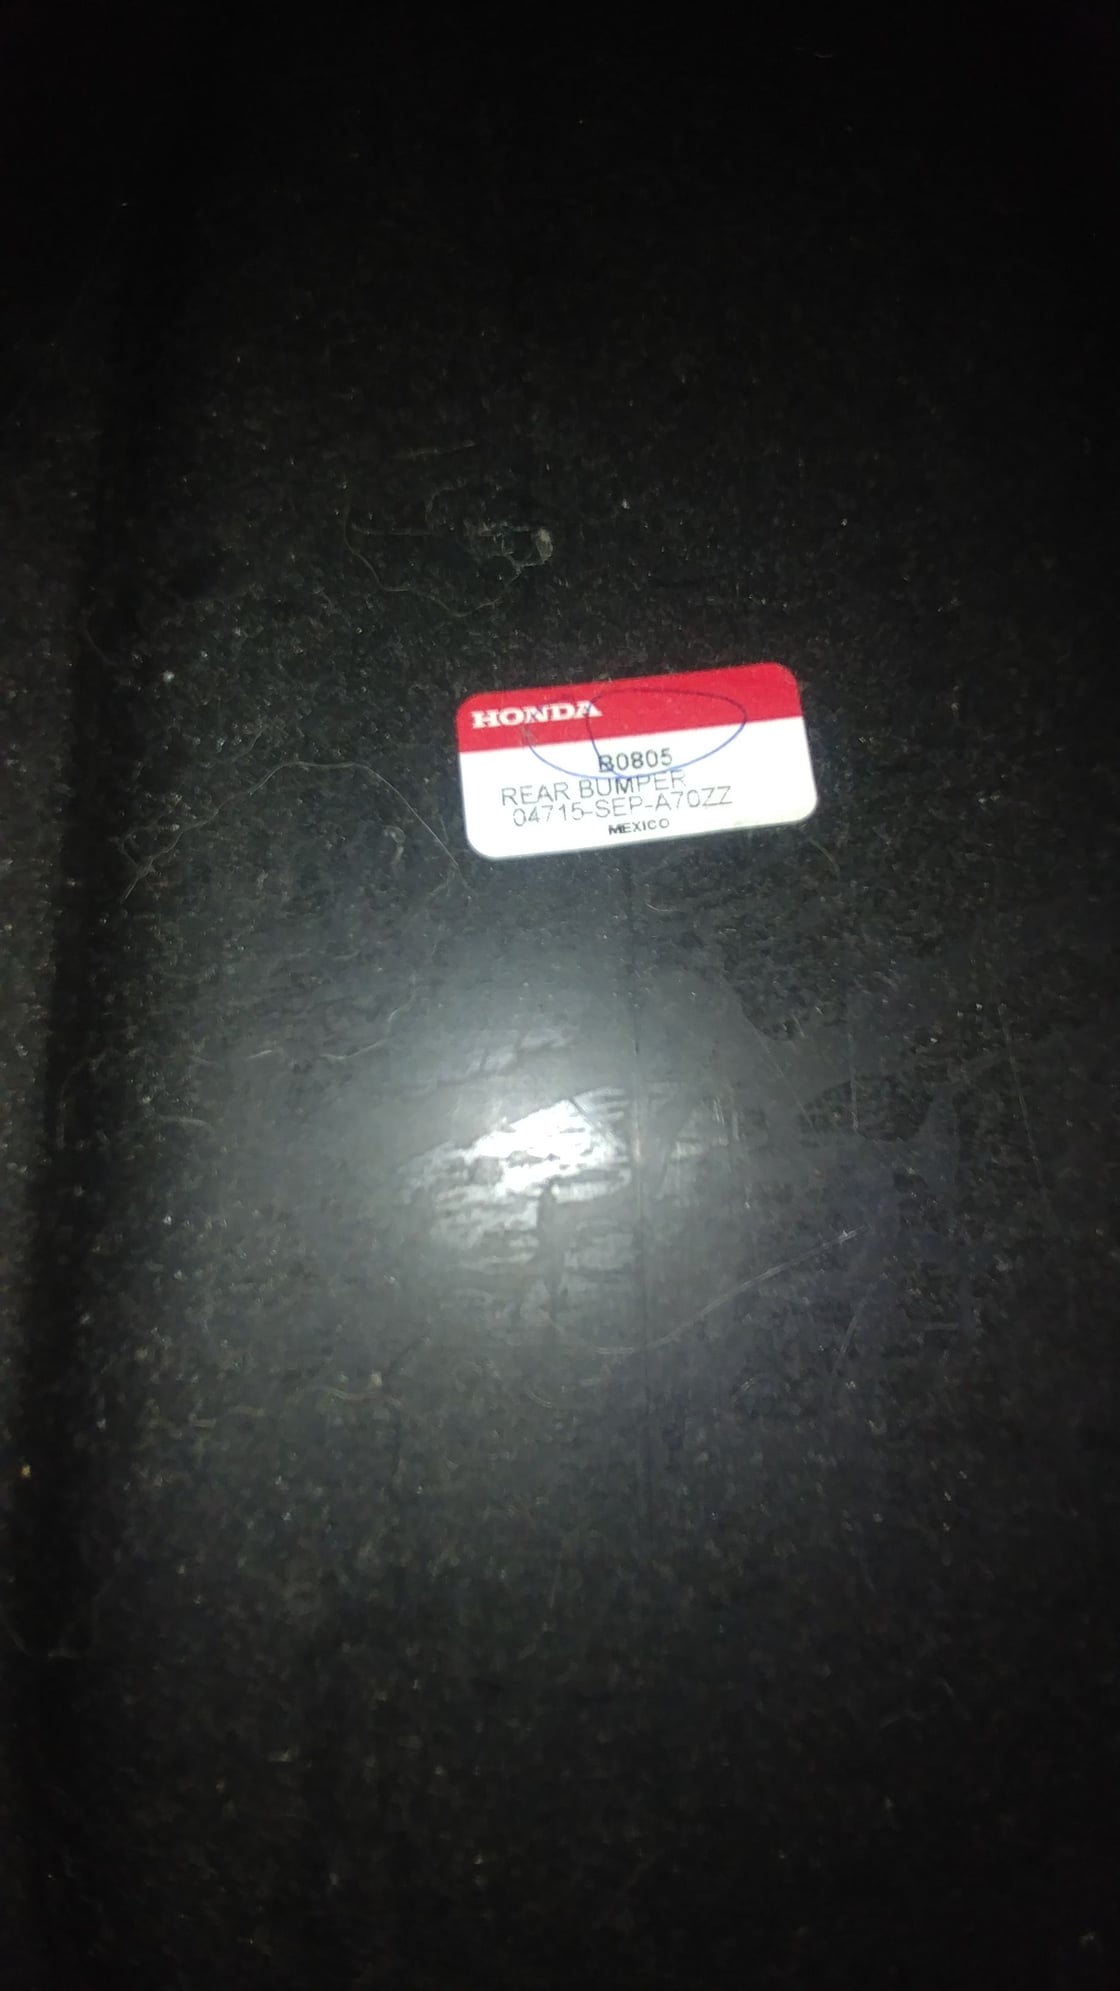 2008 Acura TL - OEM Type S rear bumper ONLY (non-painted) - Accessories - $250 - Houston, TX 77053, United States